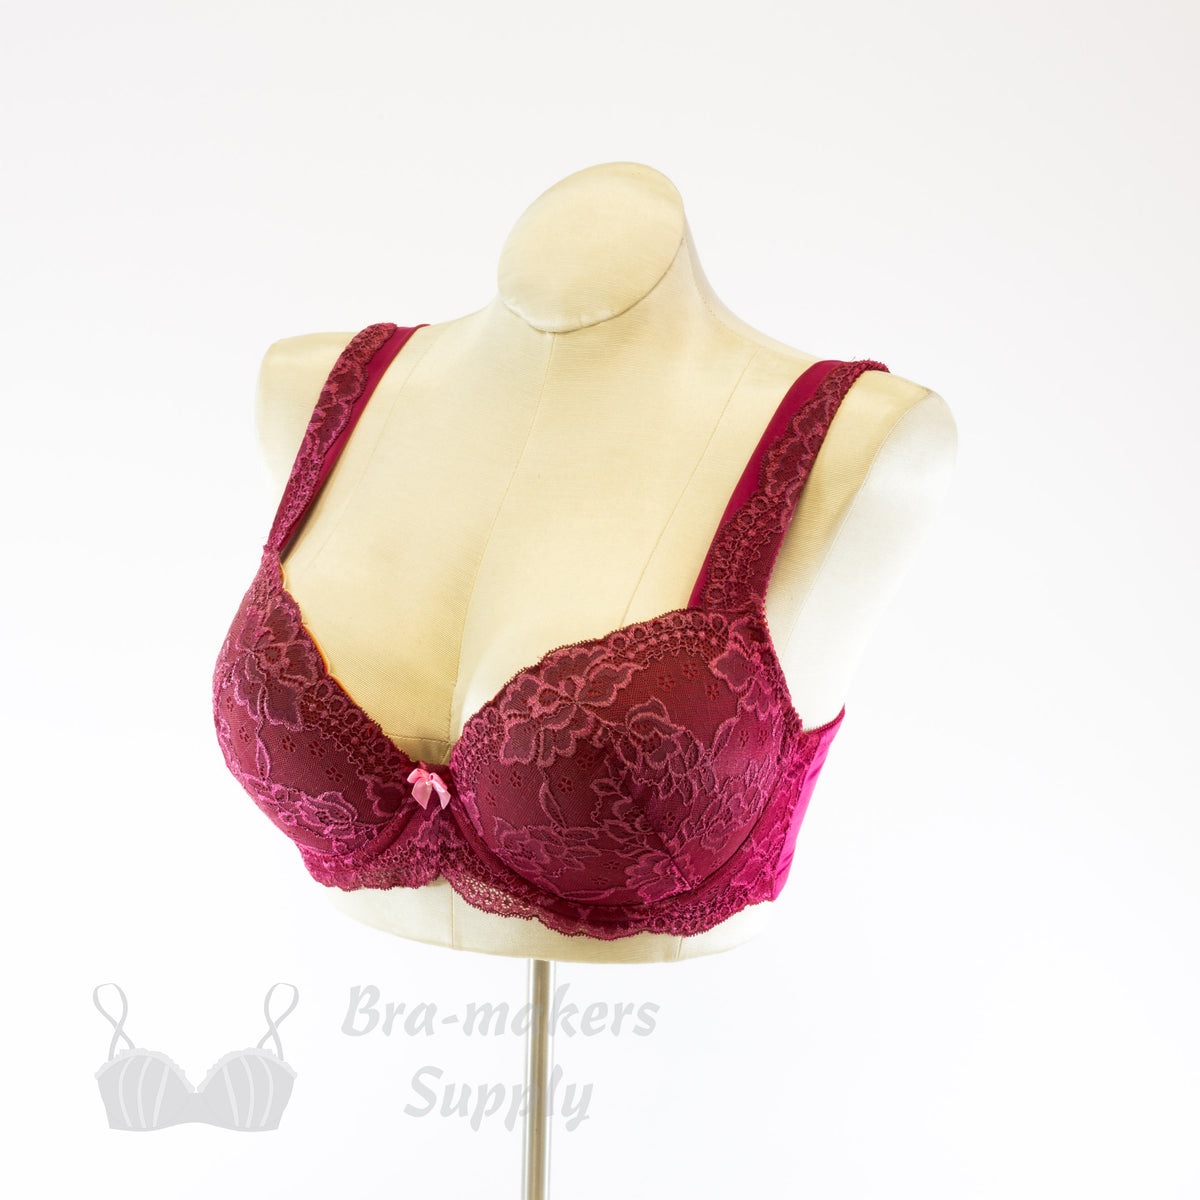 Bra Pattern, T-Shirt Bra Amelia and Anita Pattern with Foam Cups and Lace,  Bra-Makers Supply